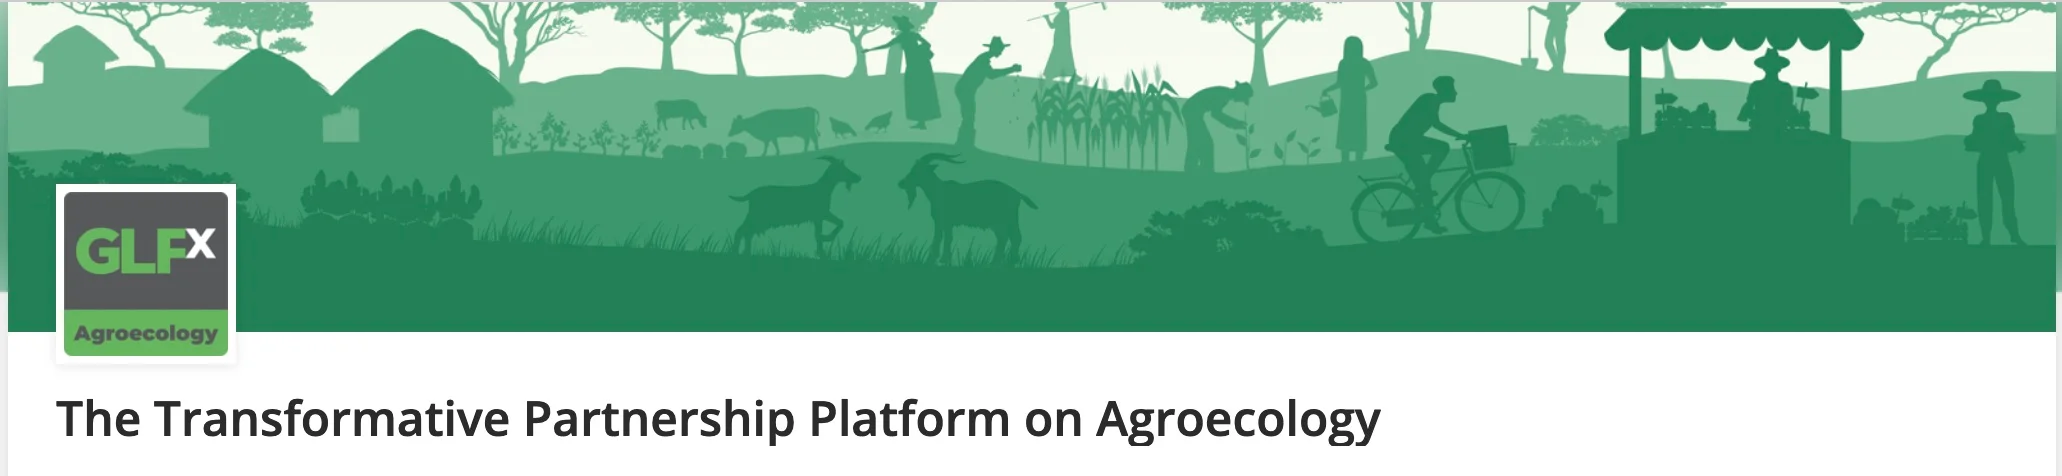 Invitation to review "Policies for Agroecology" report